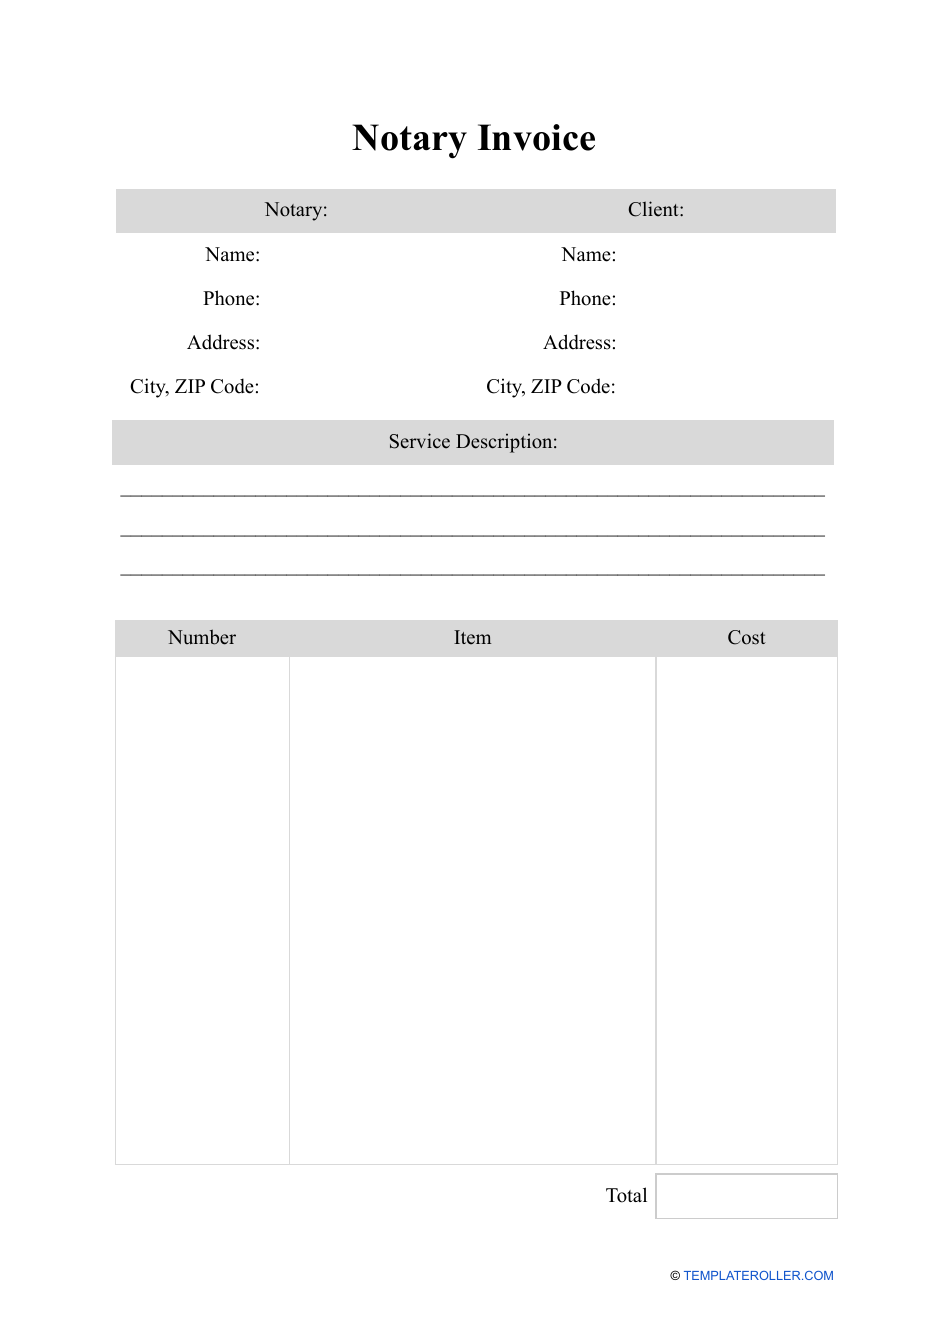 Notary Invoice Template, Page 1